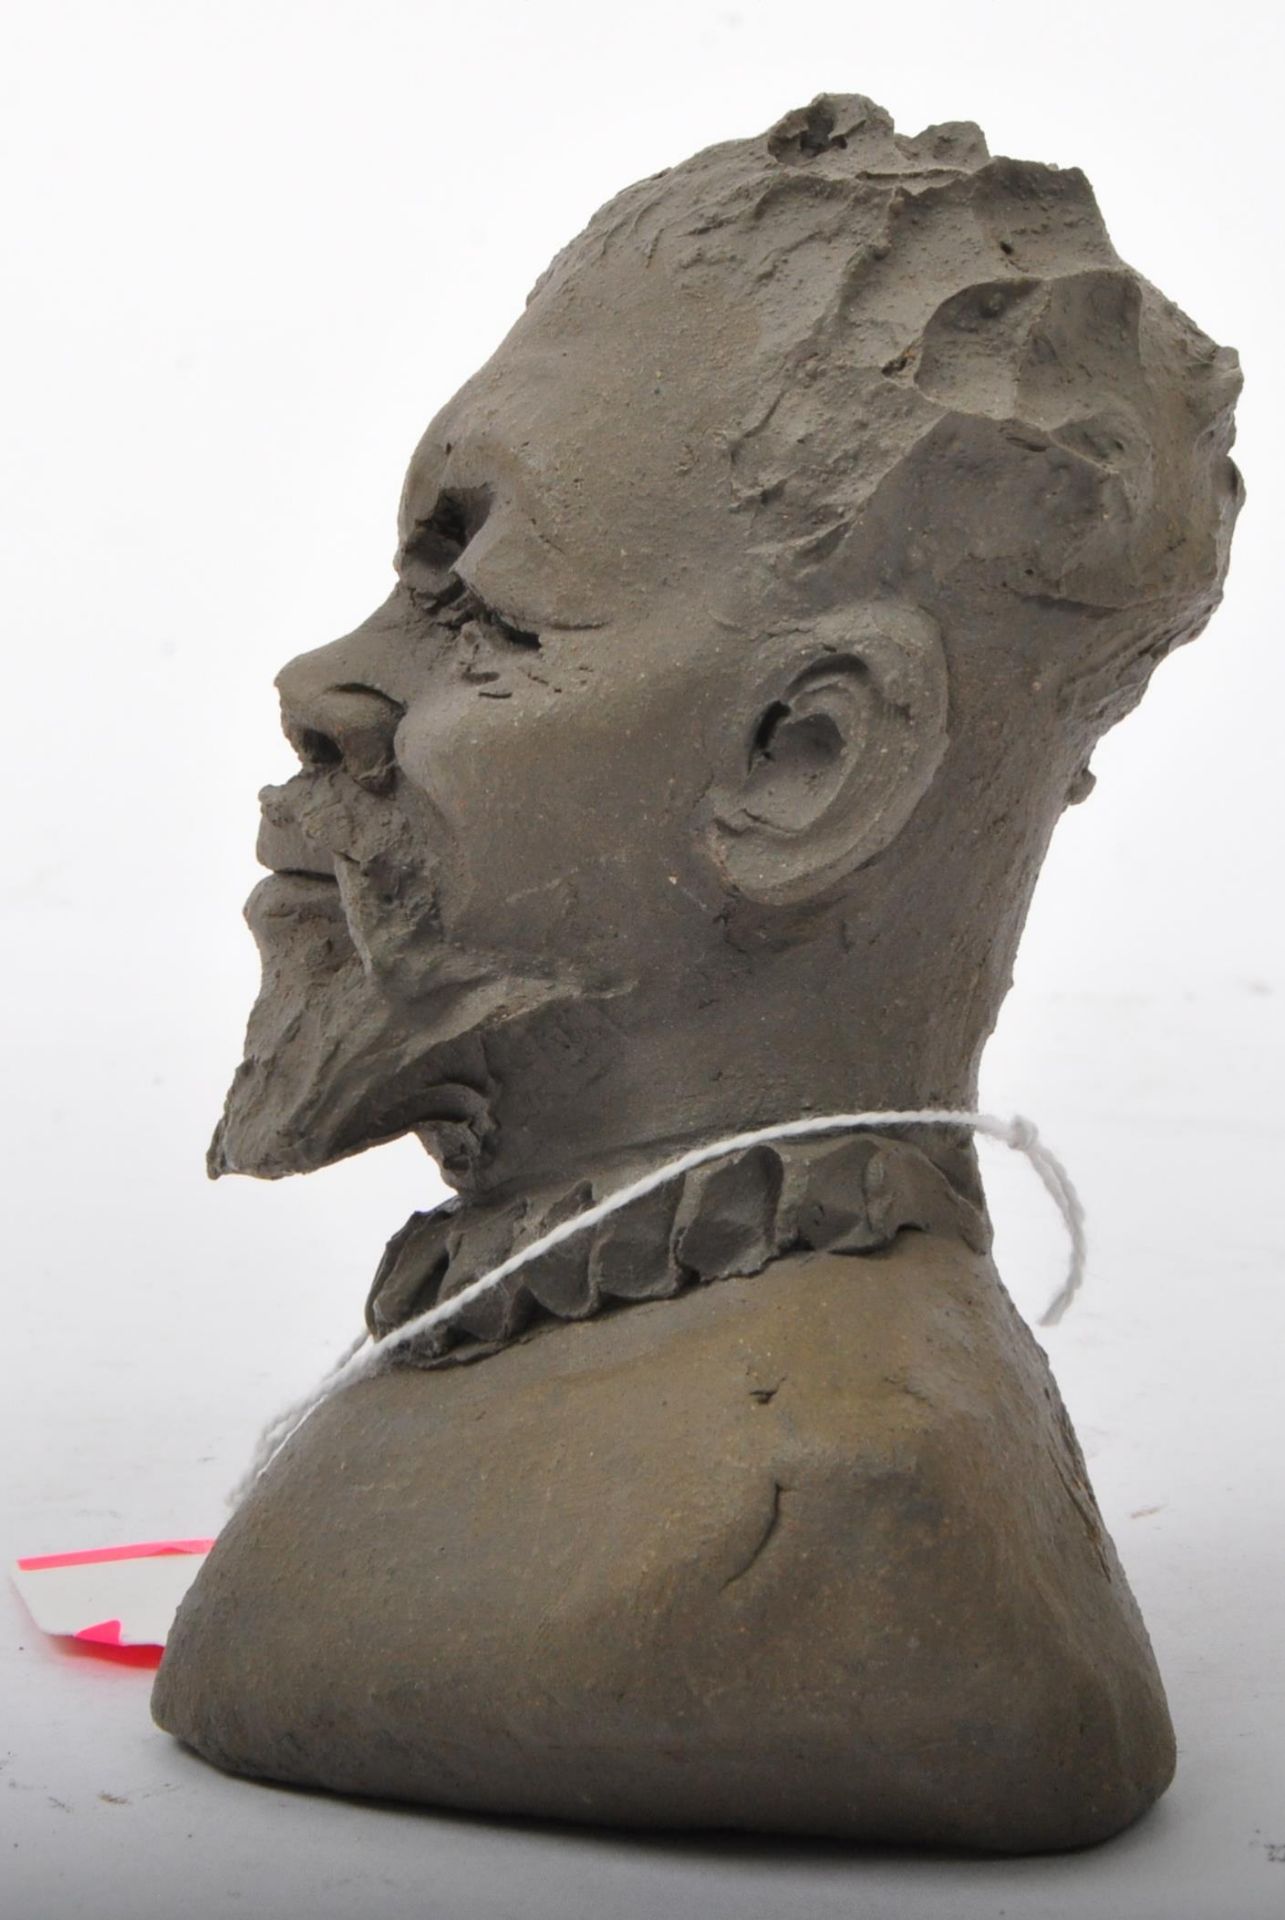 AN EARLY 20TH CENTURY CLAY POTTERY BUST OF A ZULU MAN - Image 4 of 6